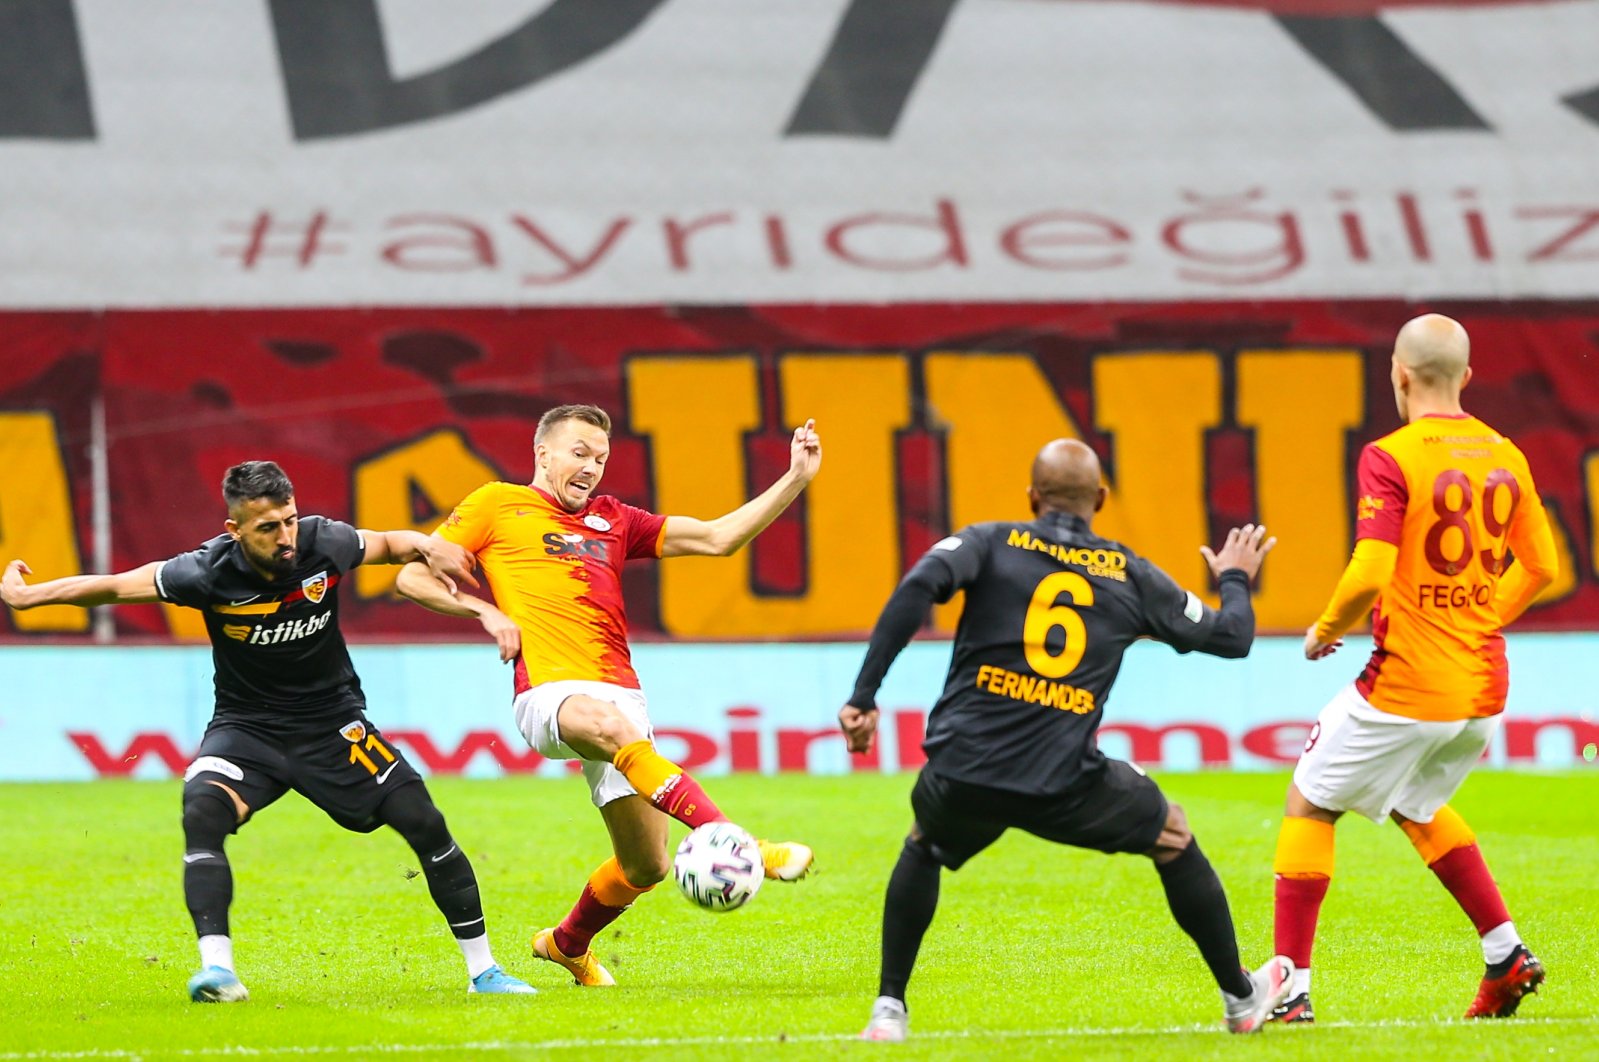 Muğdat Çelik (L) in action against Galatasaray's Martin Linnes (2nd L) during the match in Istanbul, Turkey, Nov. 24, 2020. (AA Photo)